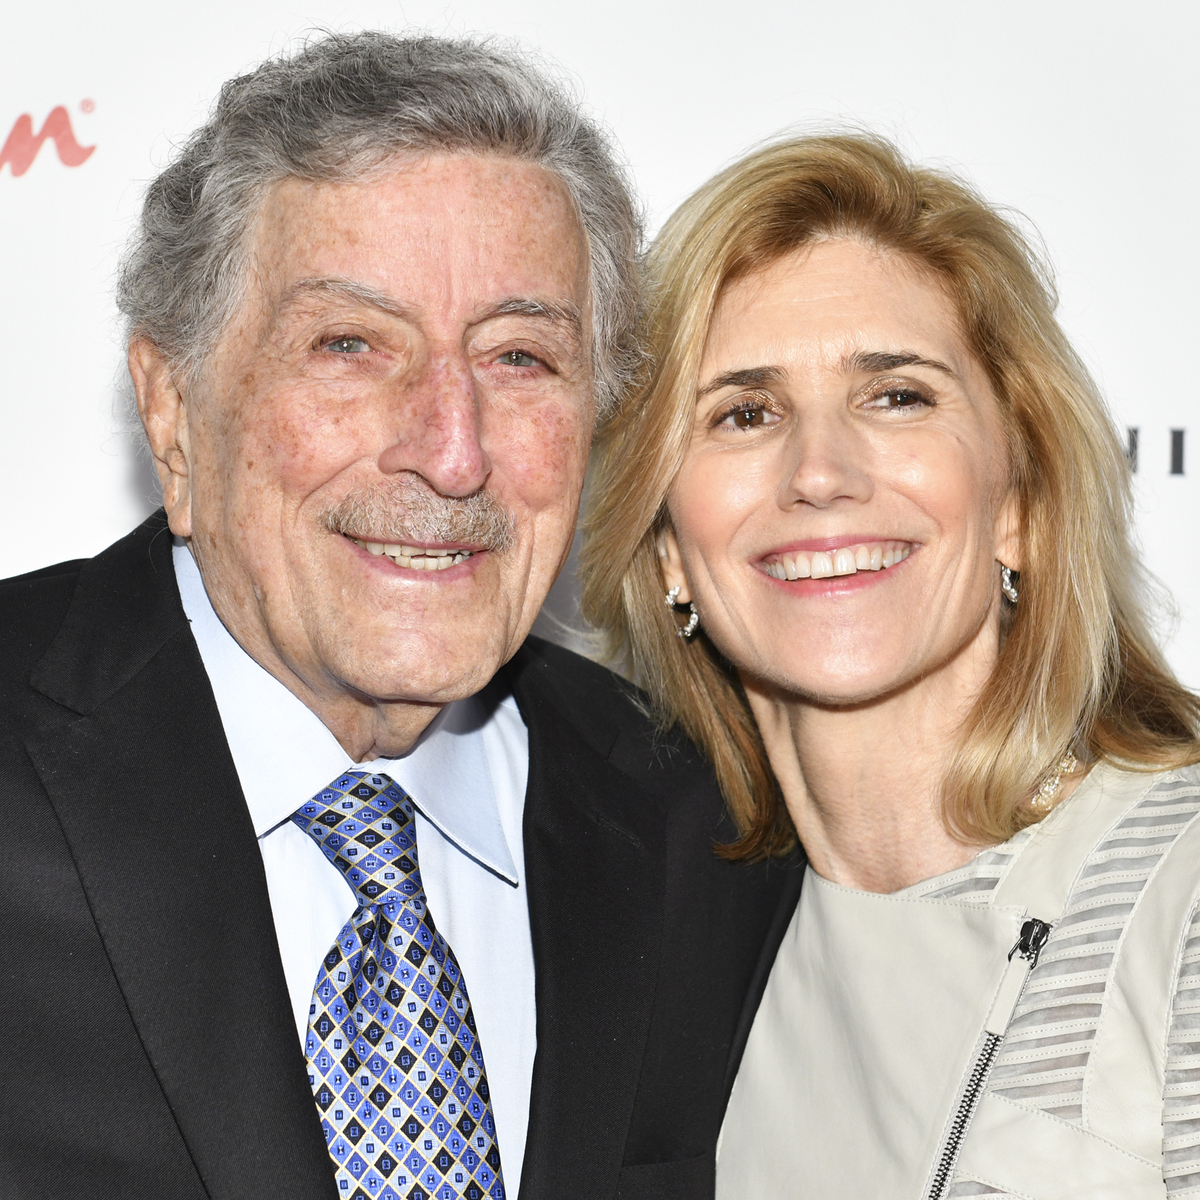 Tony Bennett’s Wife and Son Honor His “Life and Humanity” After Death